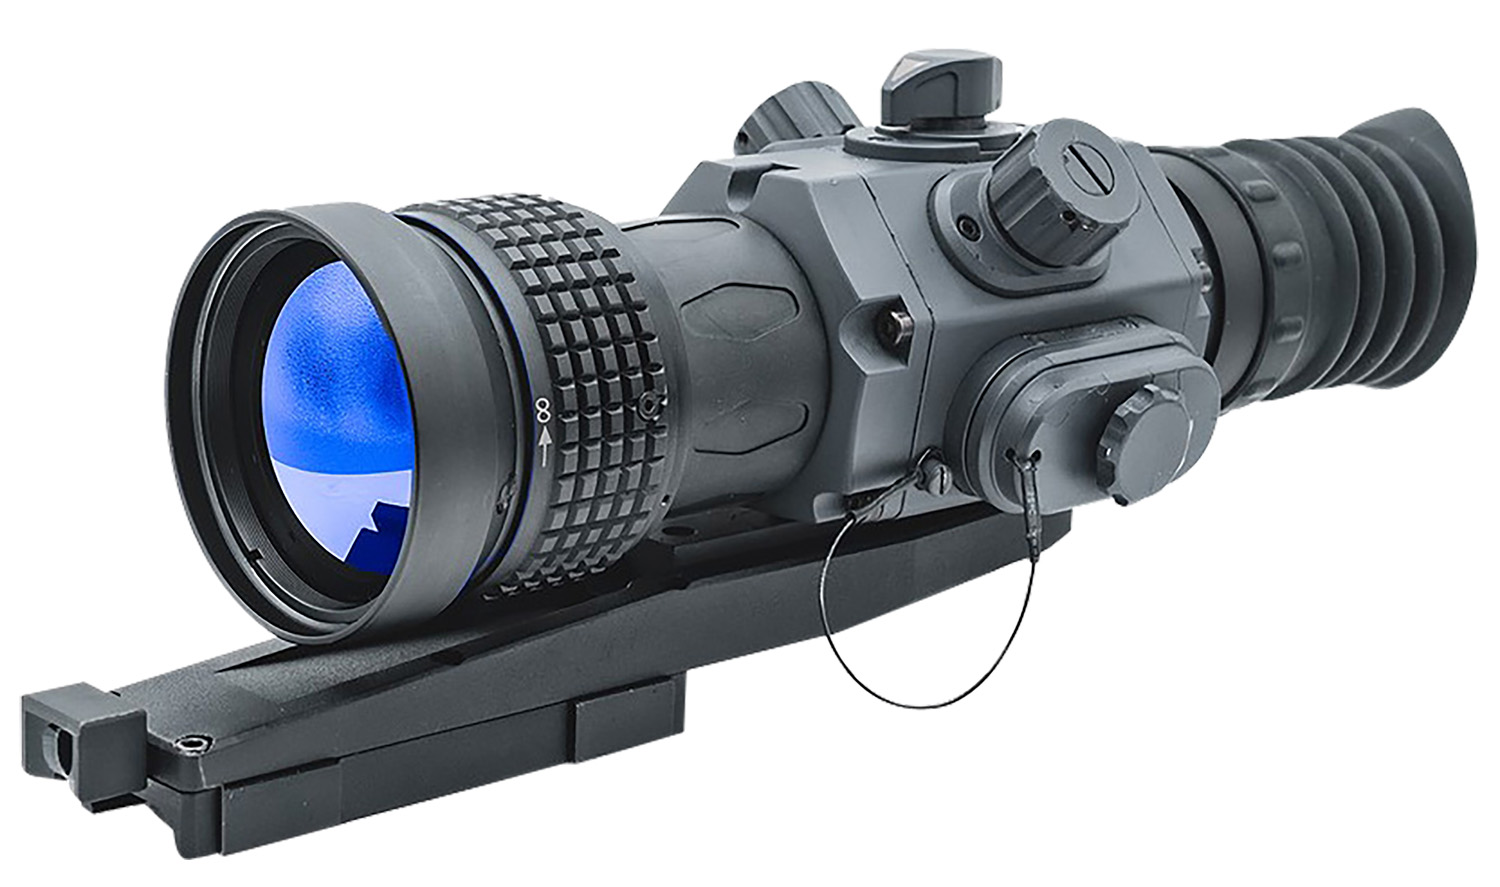 Armasight TAVT66WN5CONT102 Contractor 640 Thermal Rifle Scope Black Hardcoat Anodized 3-12x 50mm Multi Reticle 640x480 Resolution Zoom 1x-4x